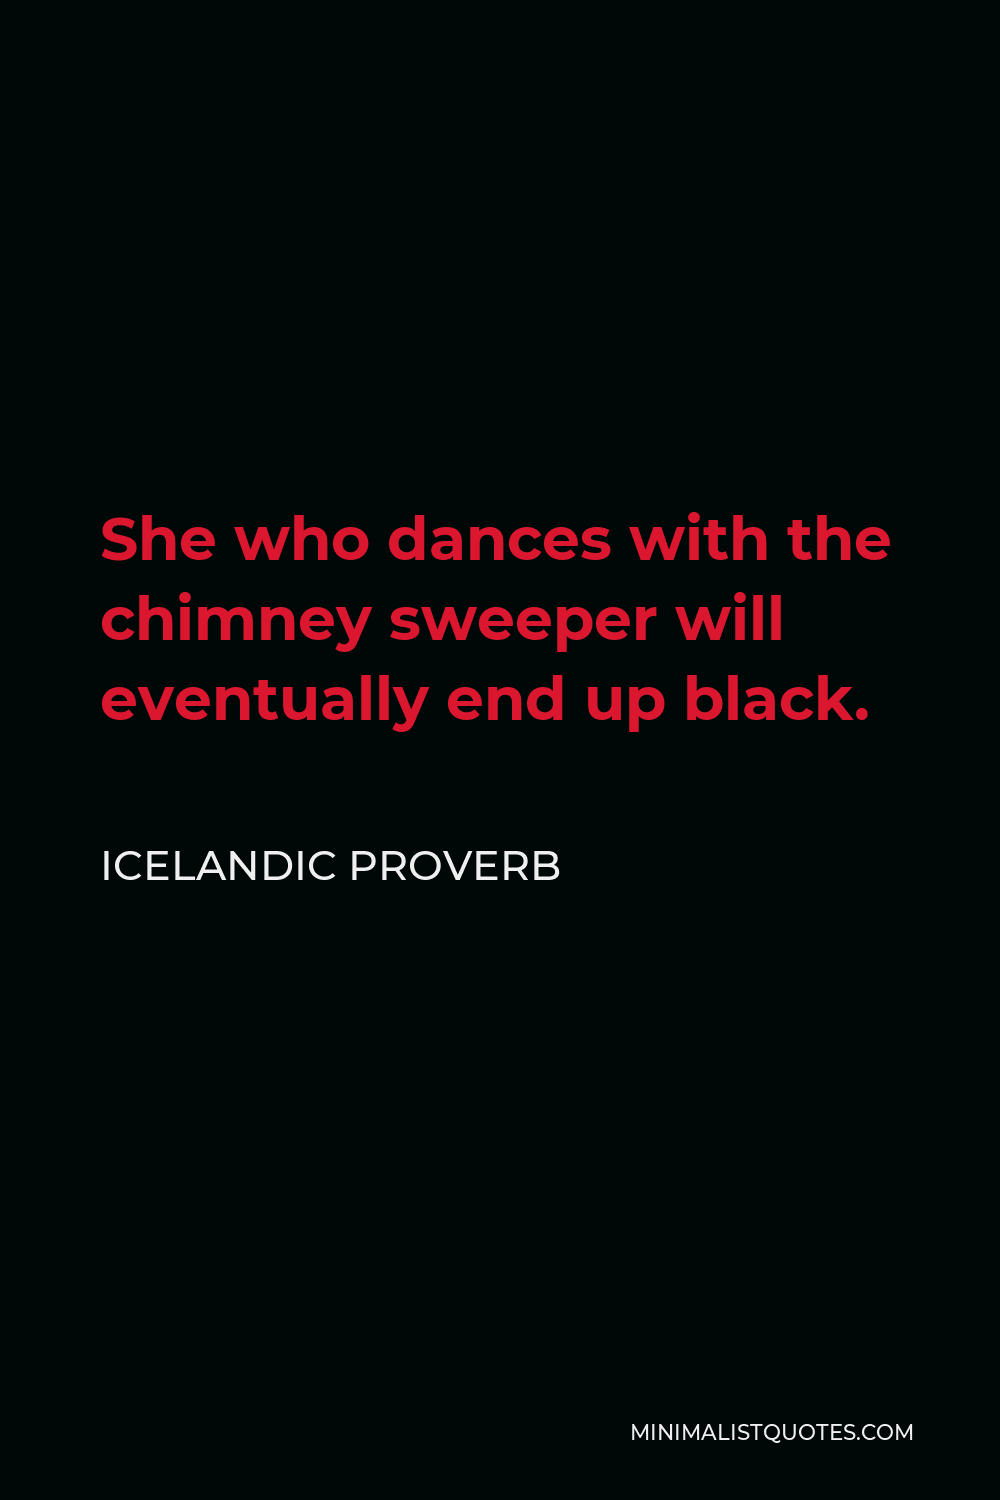 Icelandic Proverb Quote - She who dances with the chimney sweeper will eventually end up black.